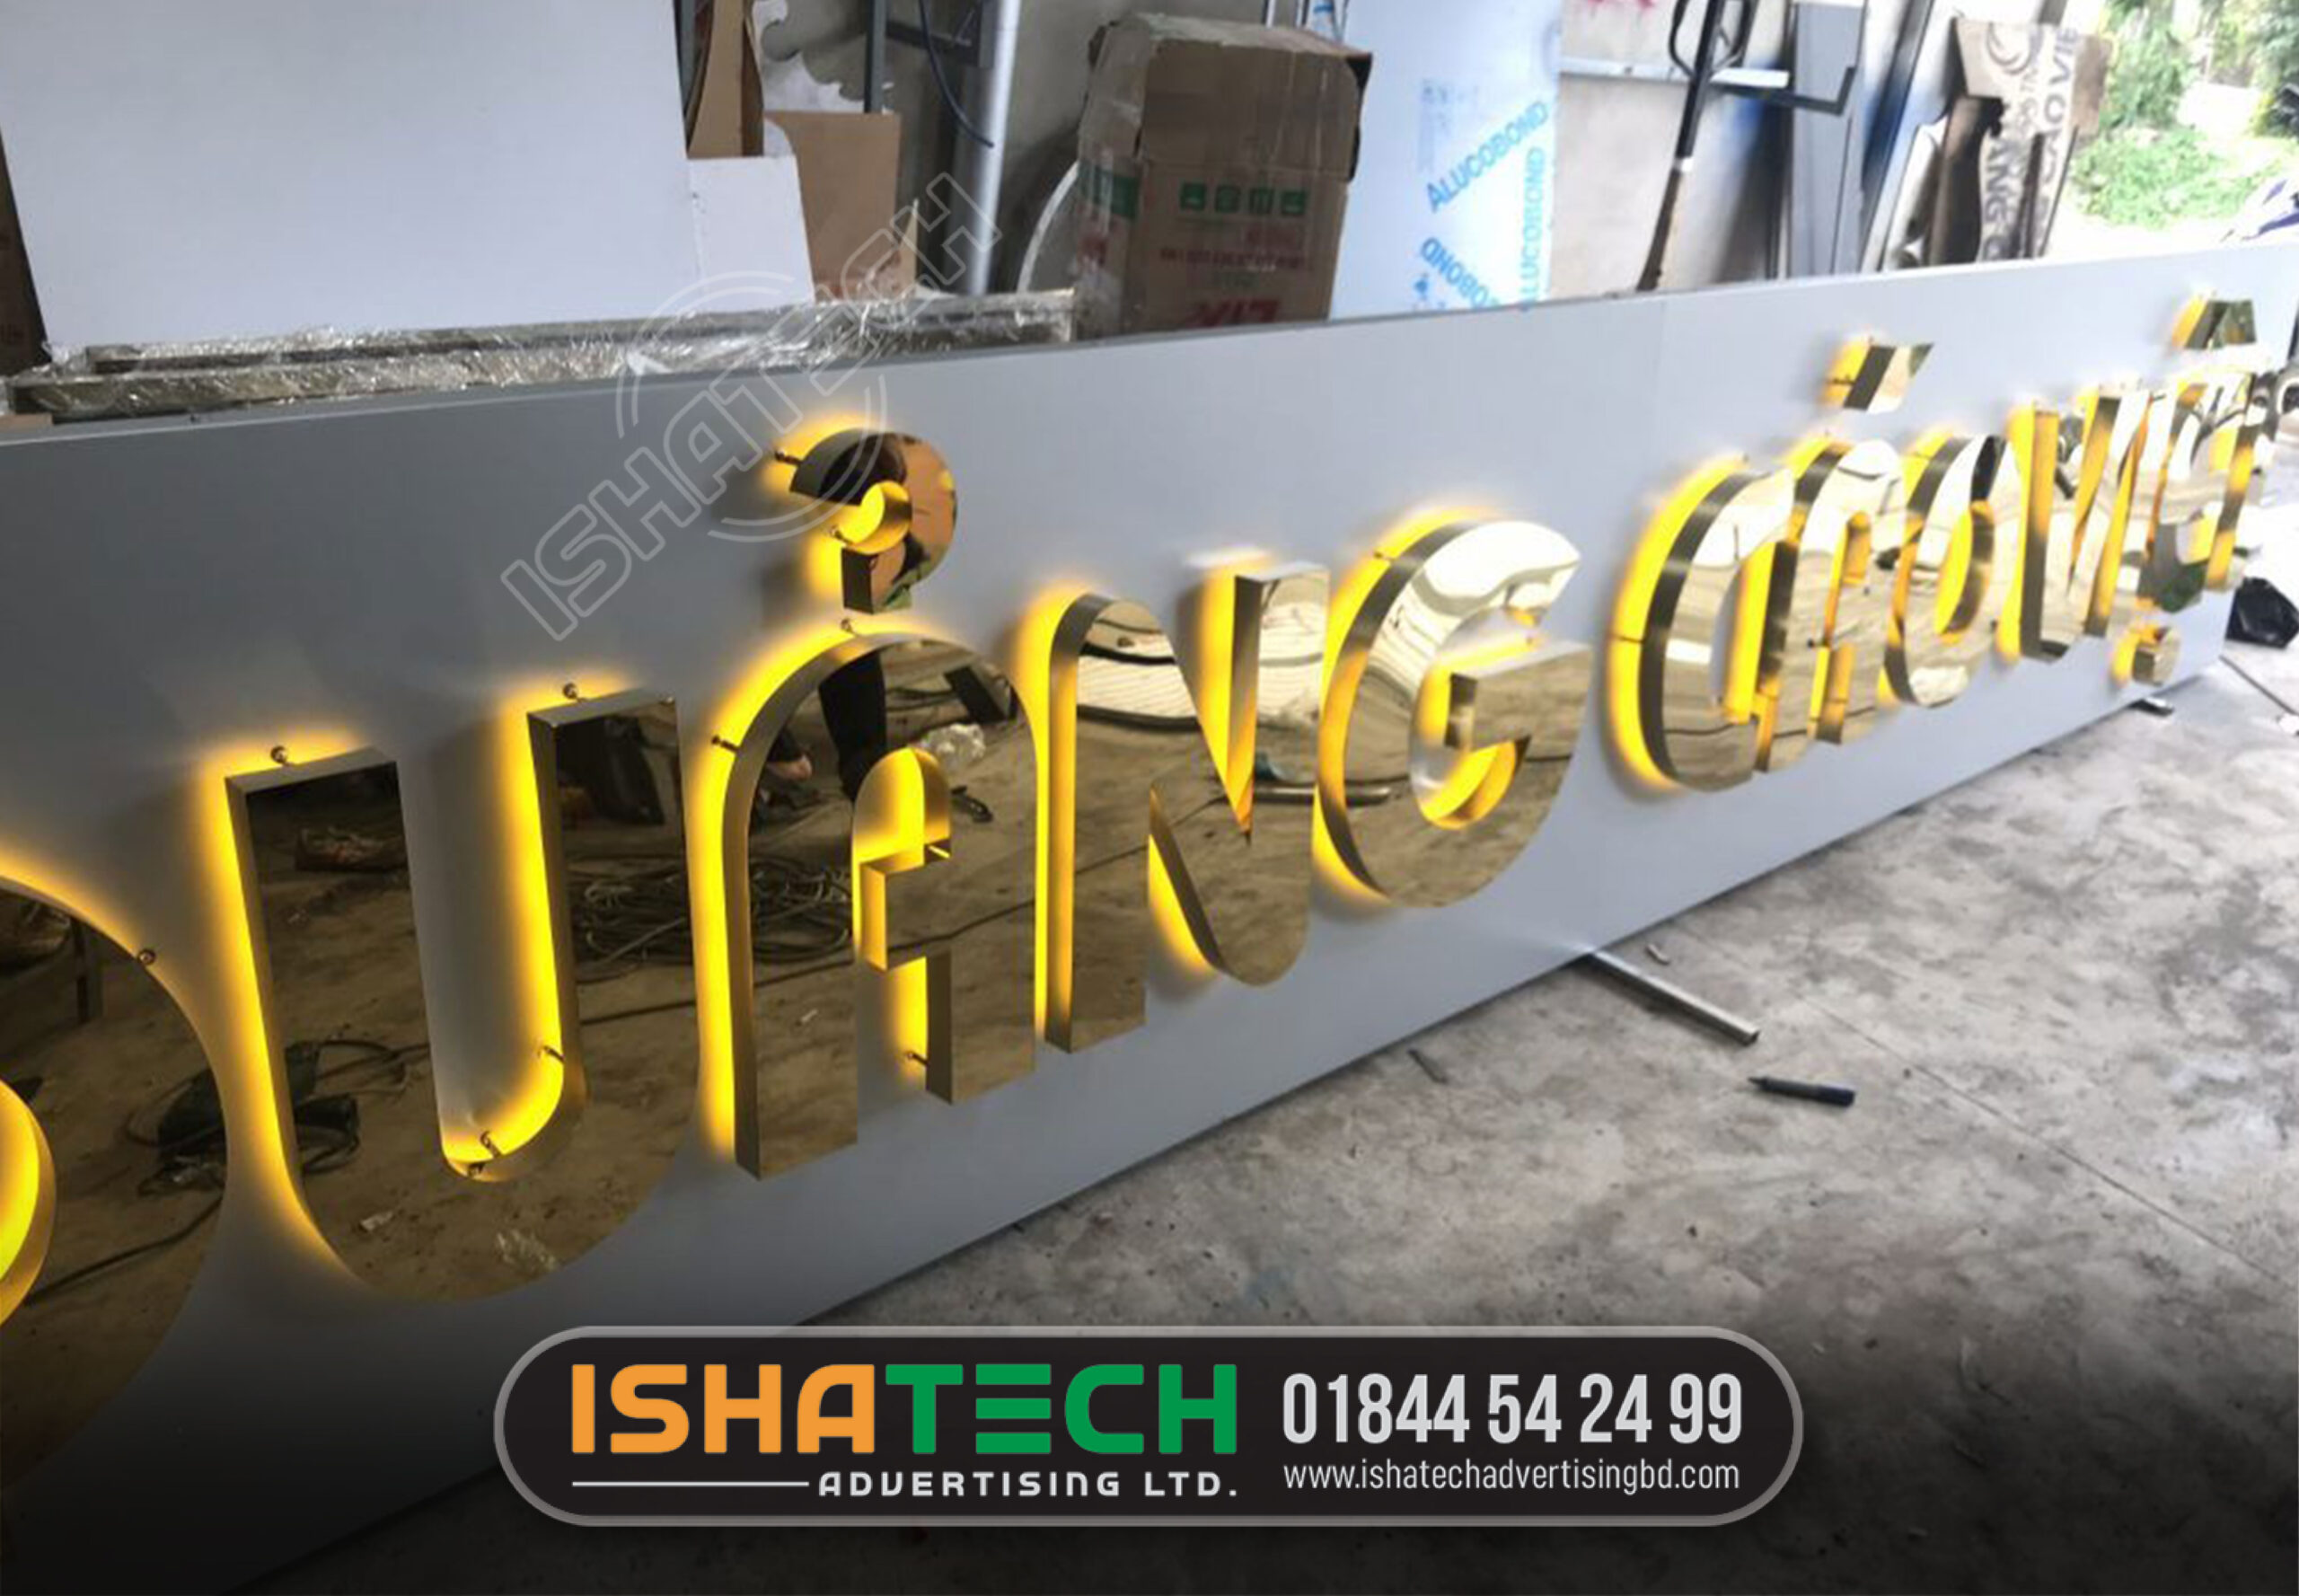 Cheap and Quality Stainless Board BD, SIGANGE AGENCY IN DHAKA BD